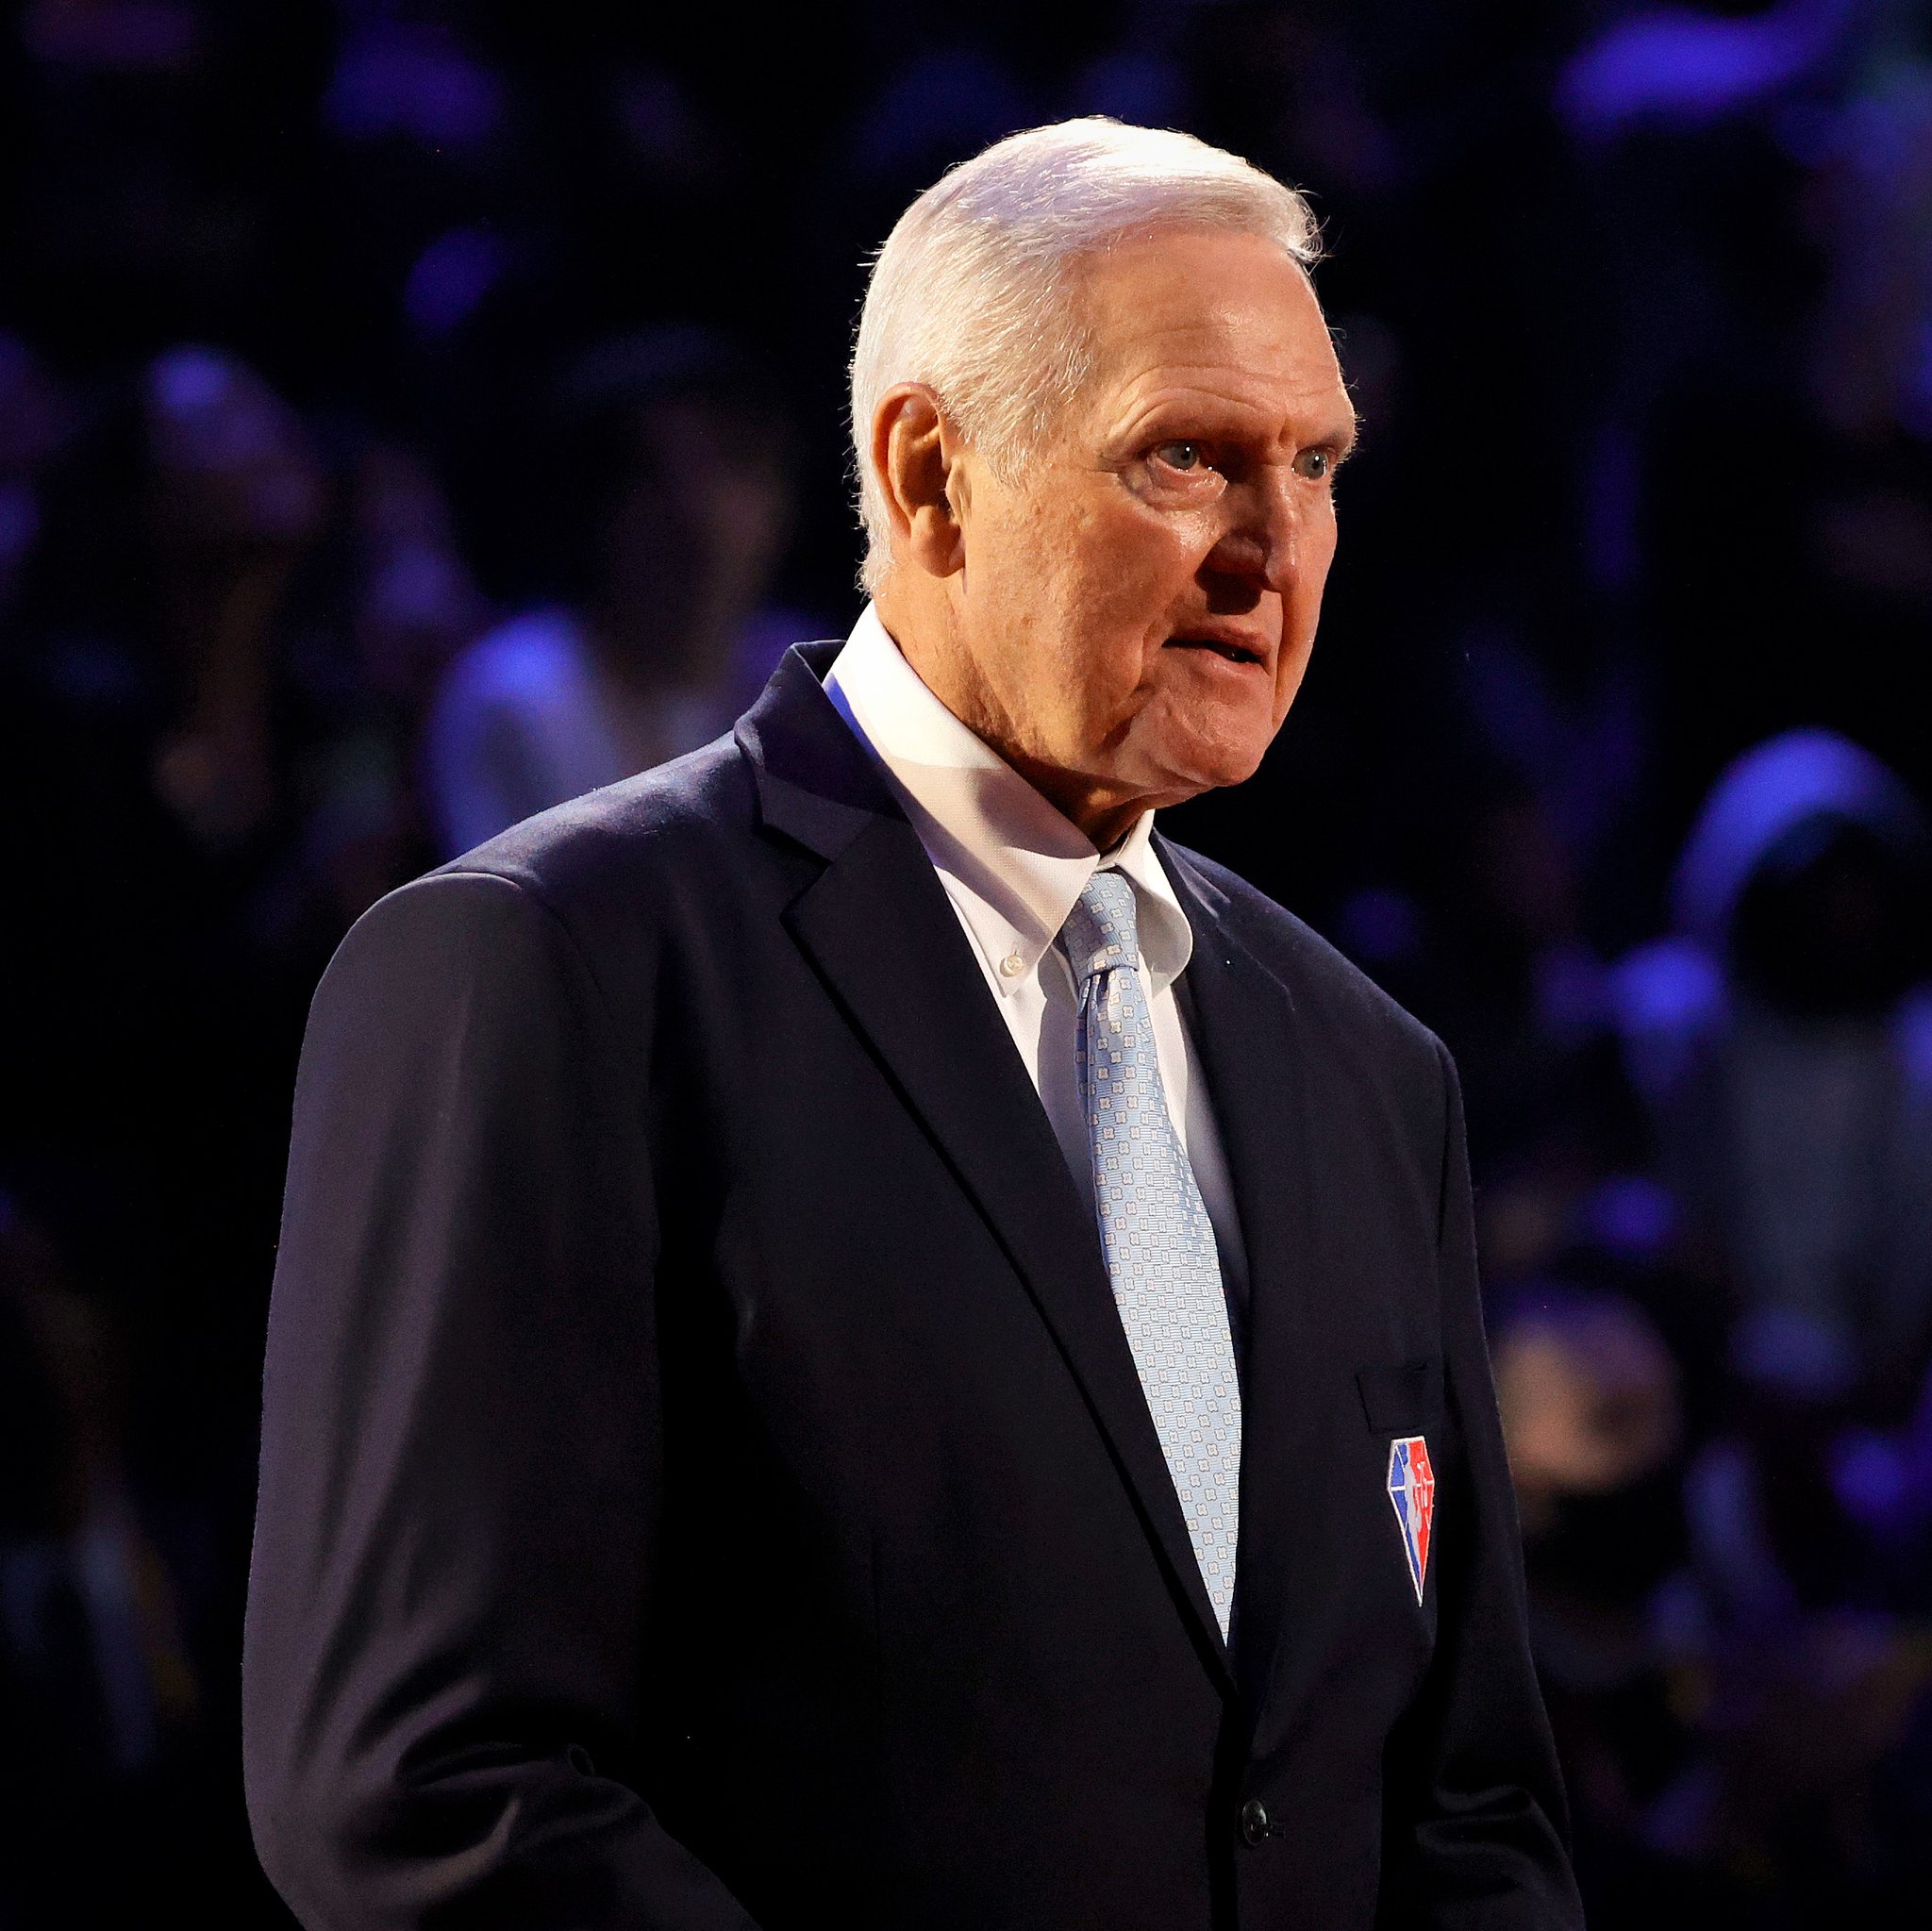 Join us in wishing a Happy Birthday to NBA legend, Jerry West   